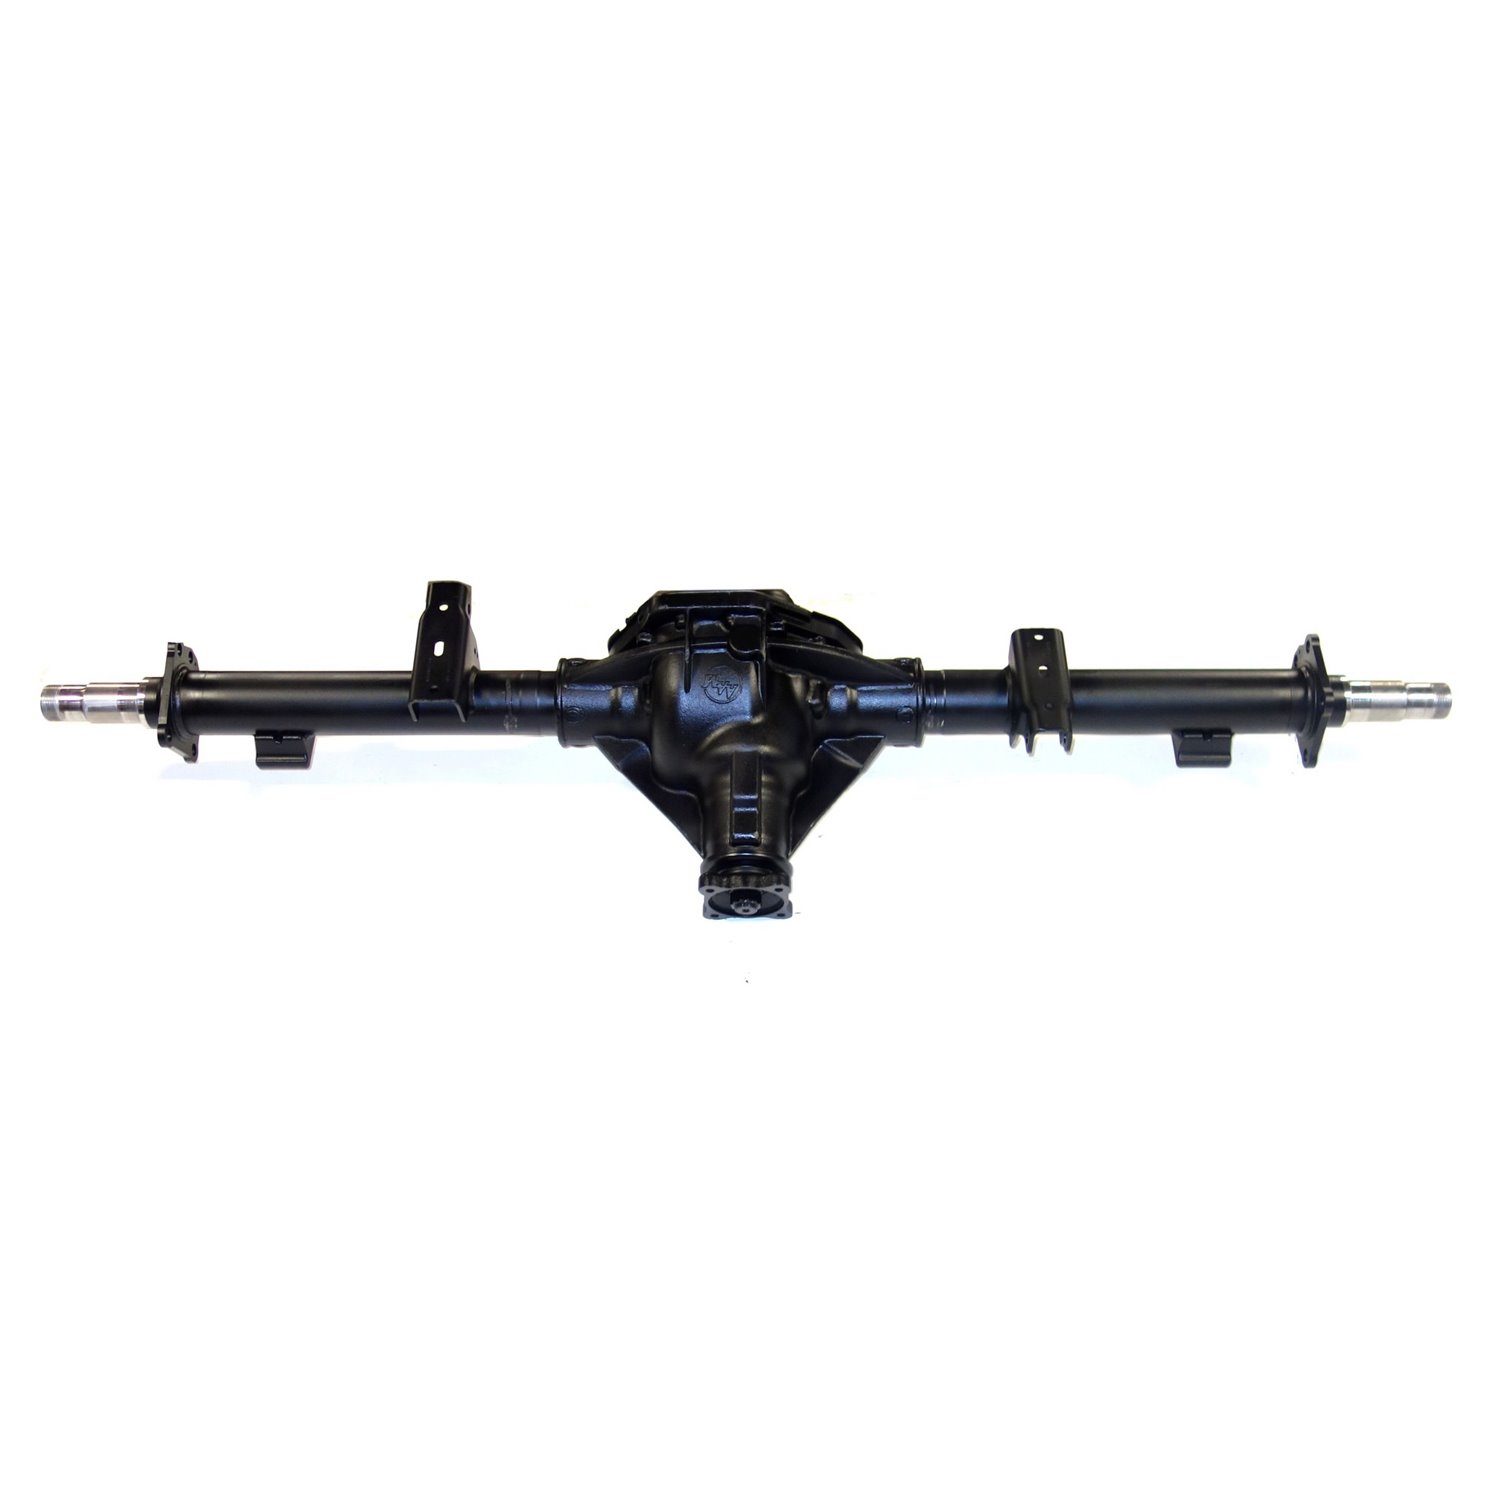 Remanufactured 10.5" AXLE ASSY '06-'08 RAM 1500 MEGA CAB, 2500 (EXC POWER WAGON), 4.10, 4WD